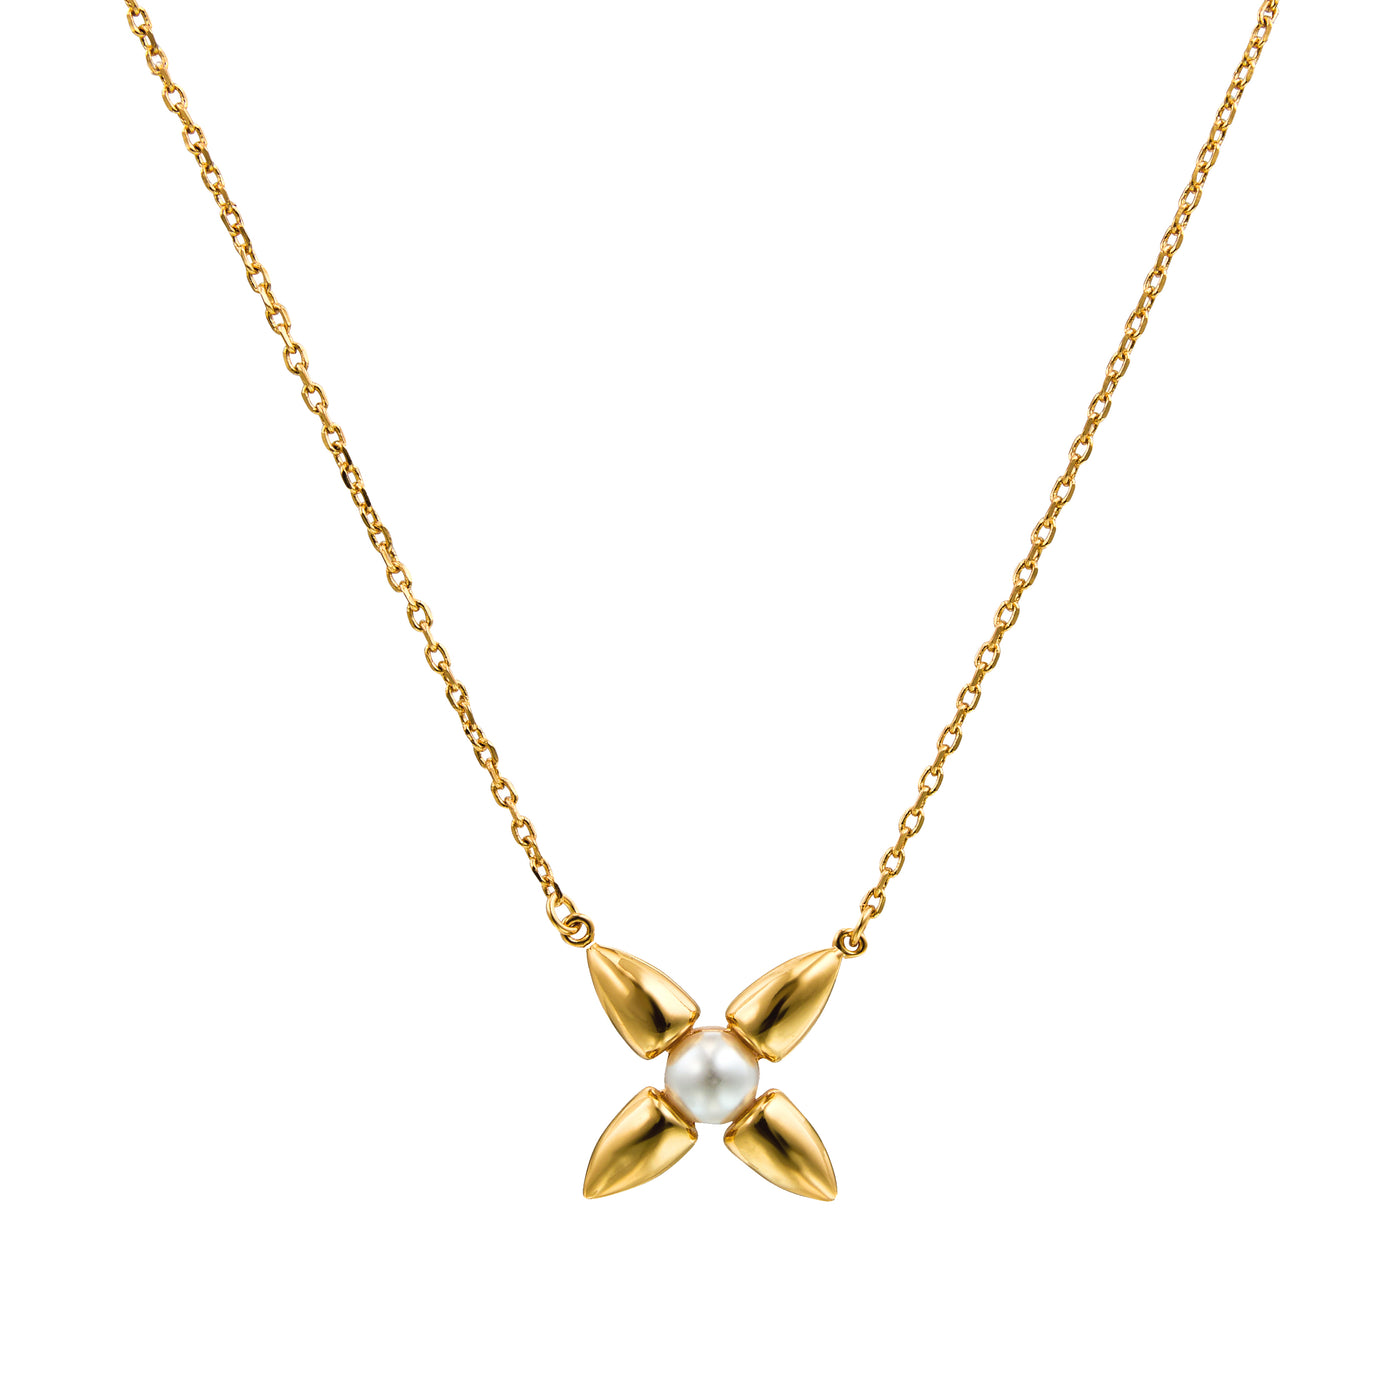 Marseille Necklace, 18KT Gold Plated